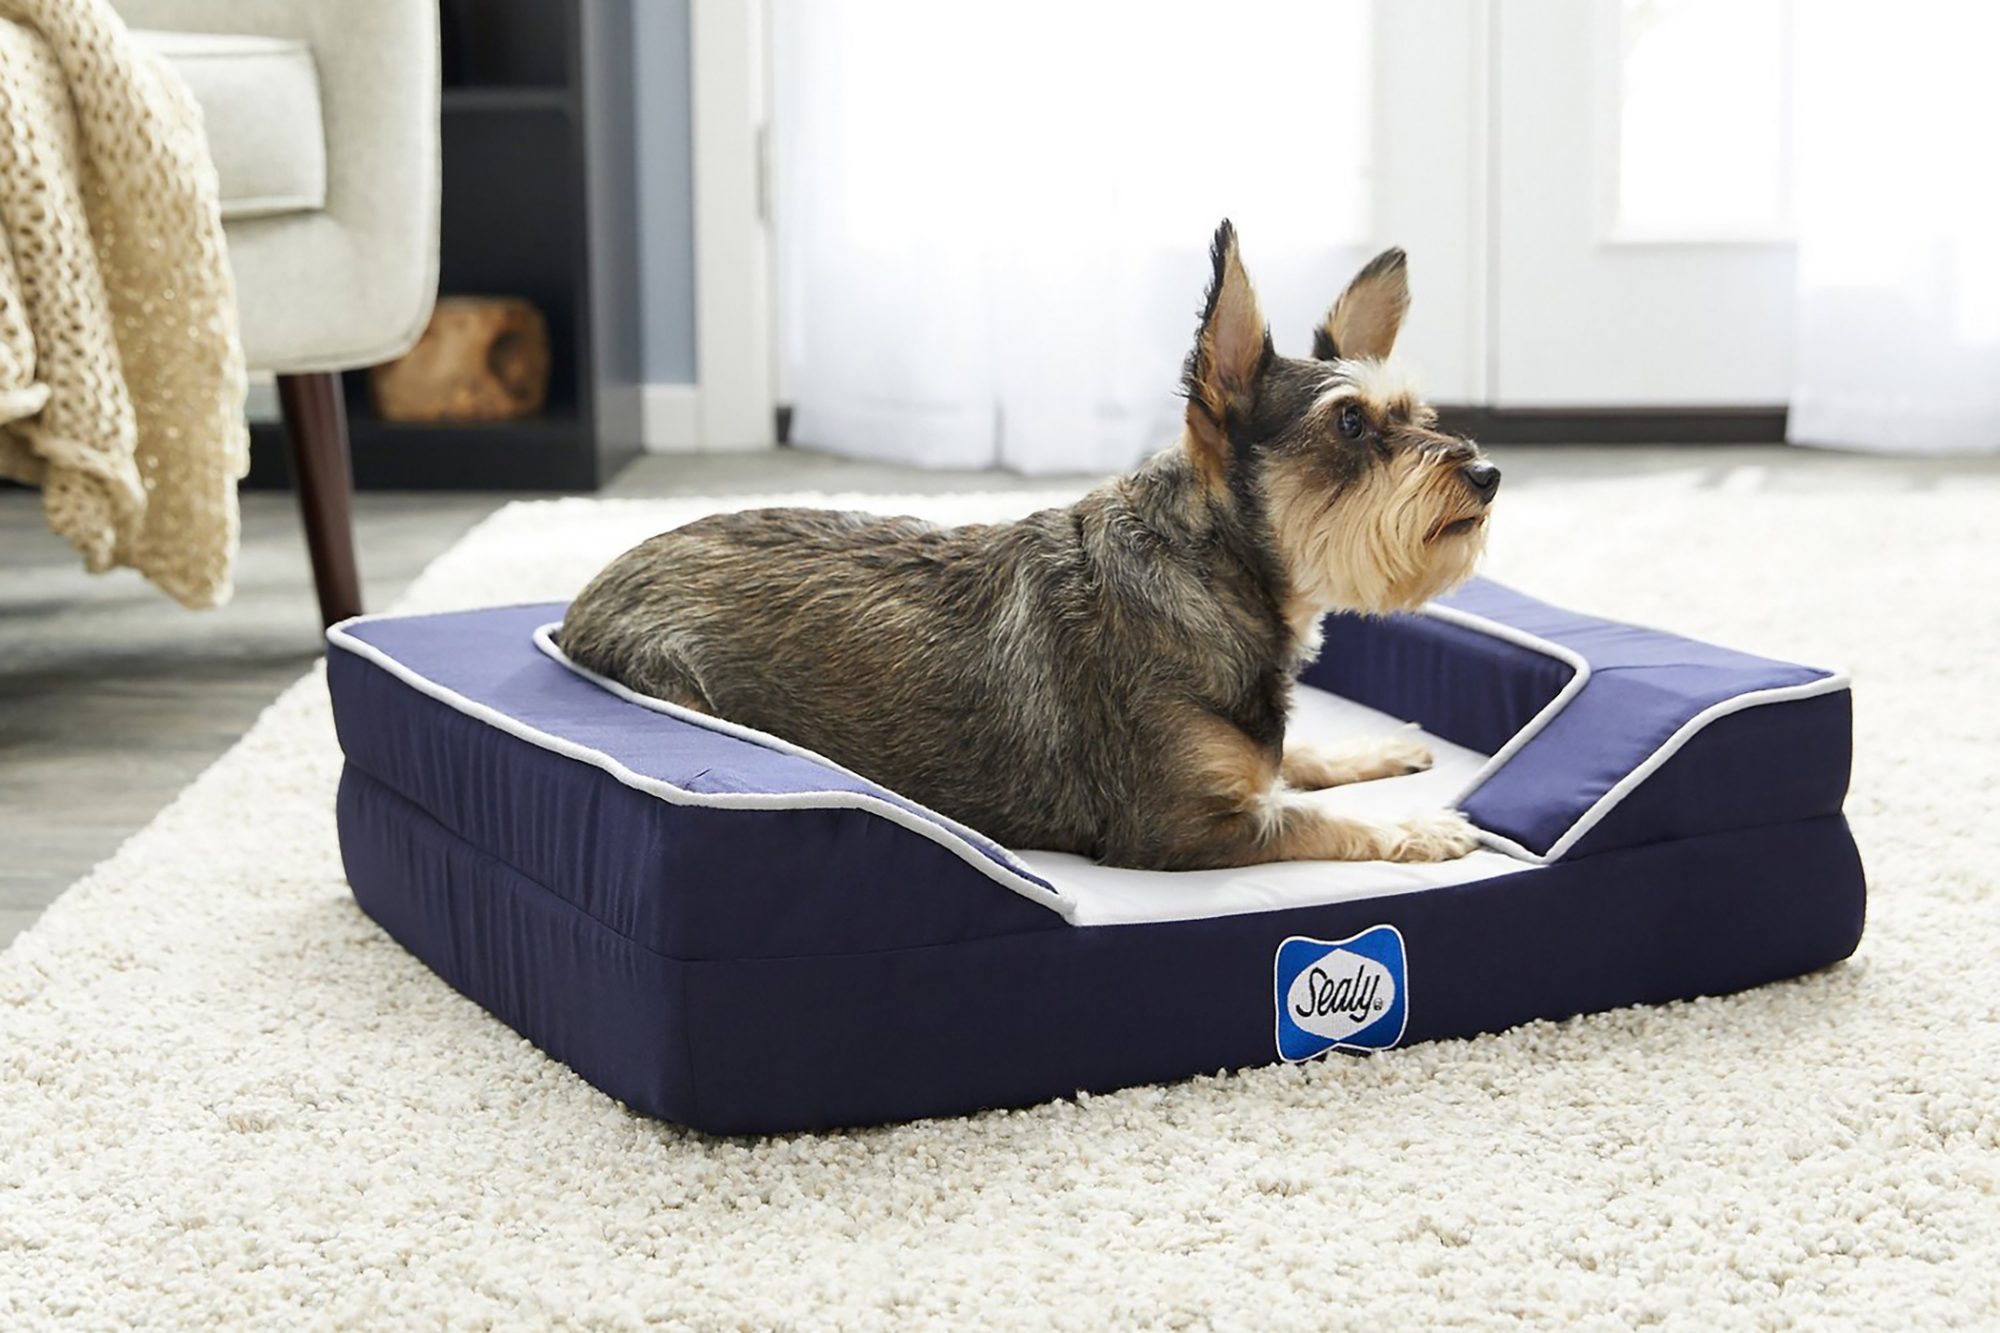 Dog Cooling Mat: How Does It Work?